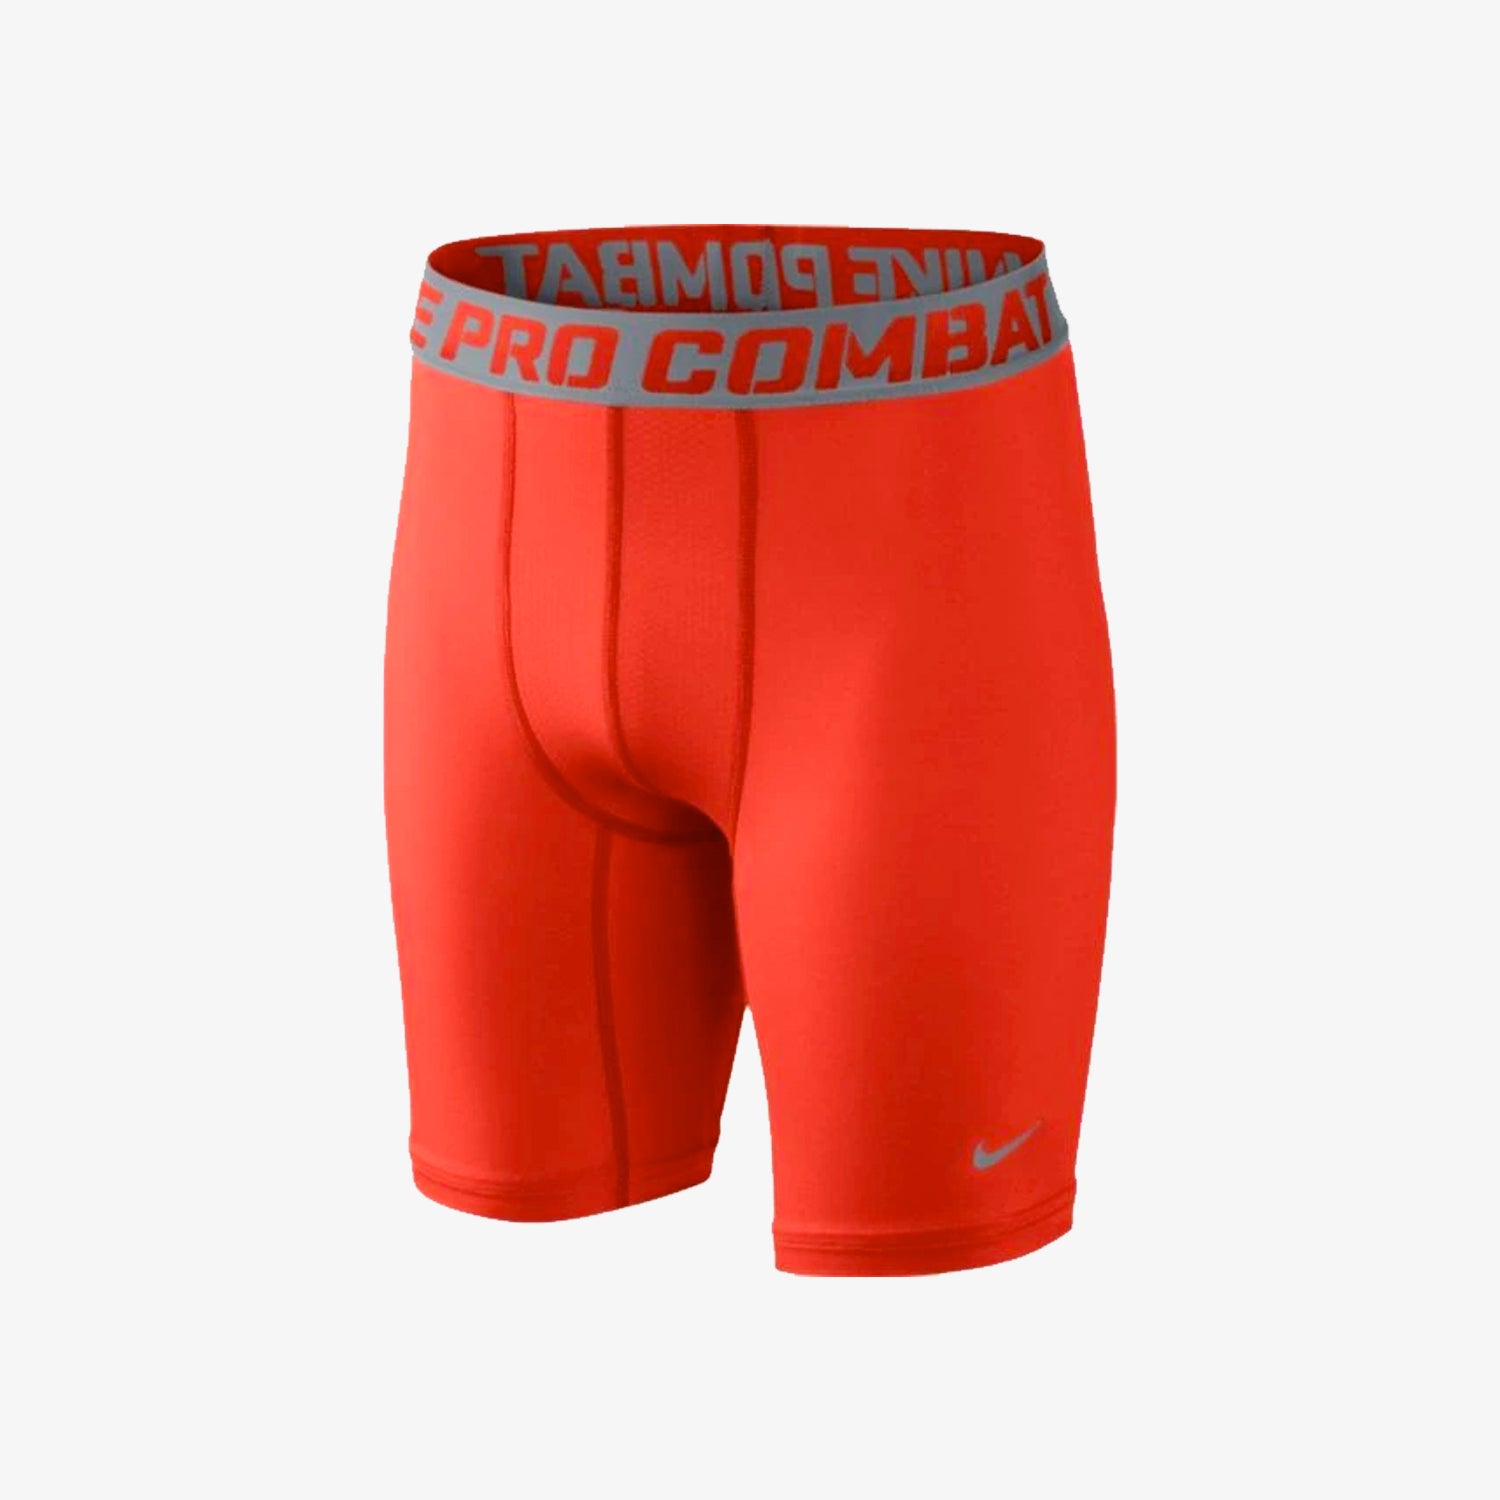 Nike Pro Compression Shorts Men's Red New with Tags